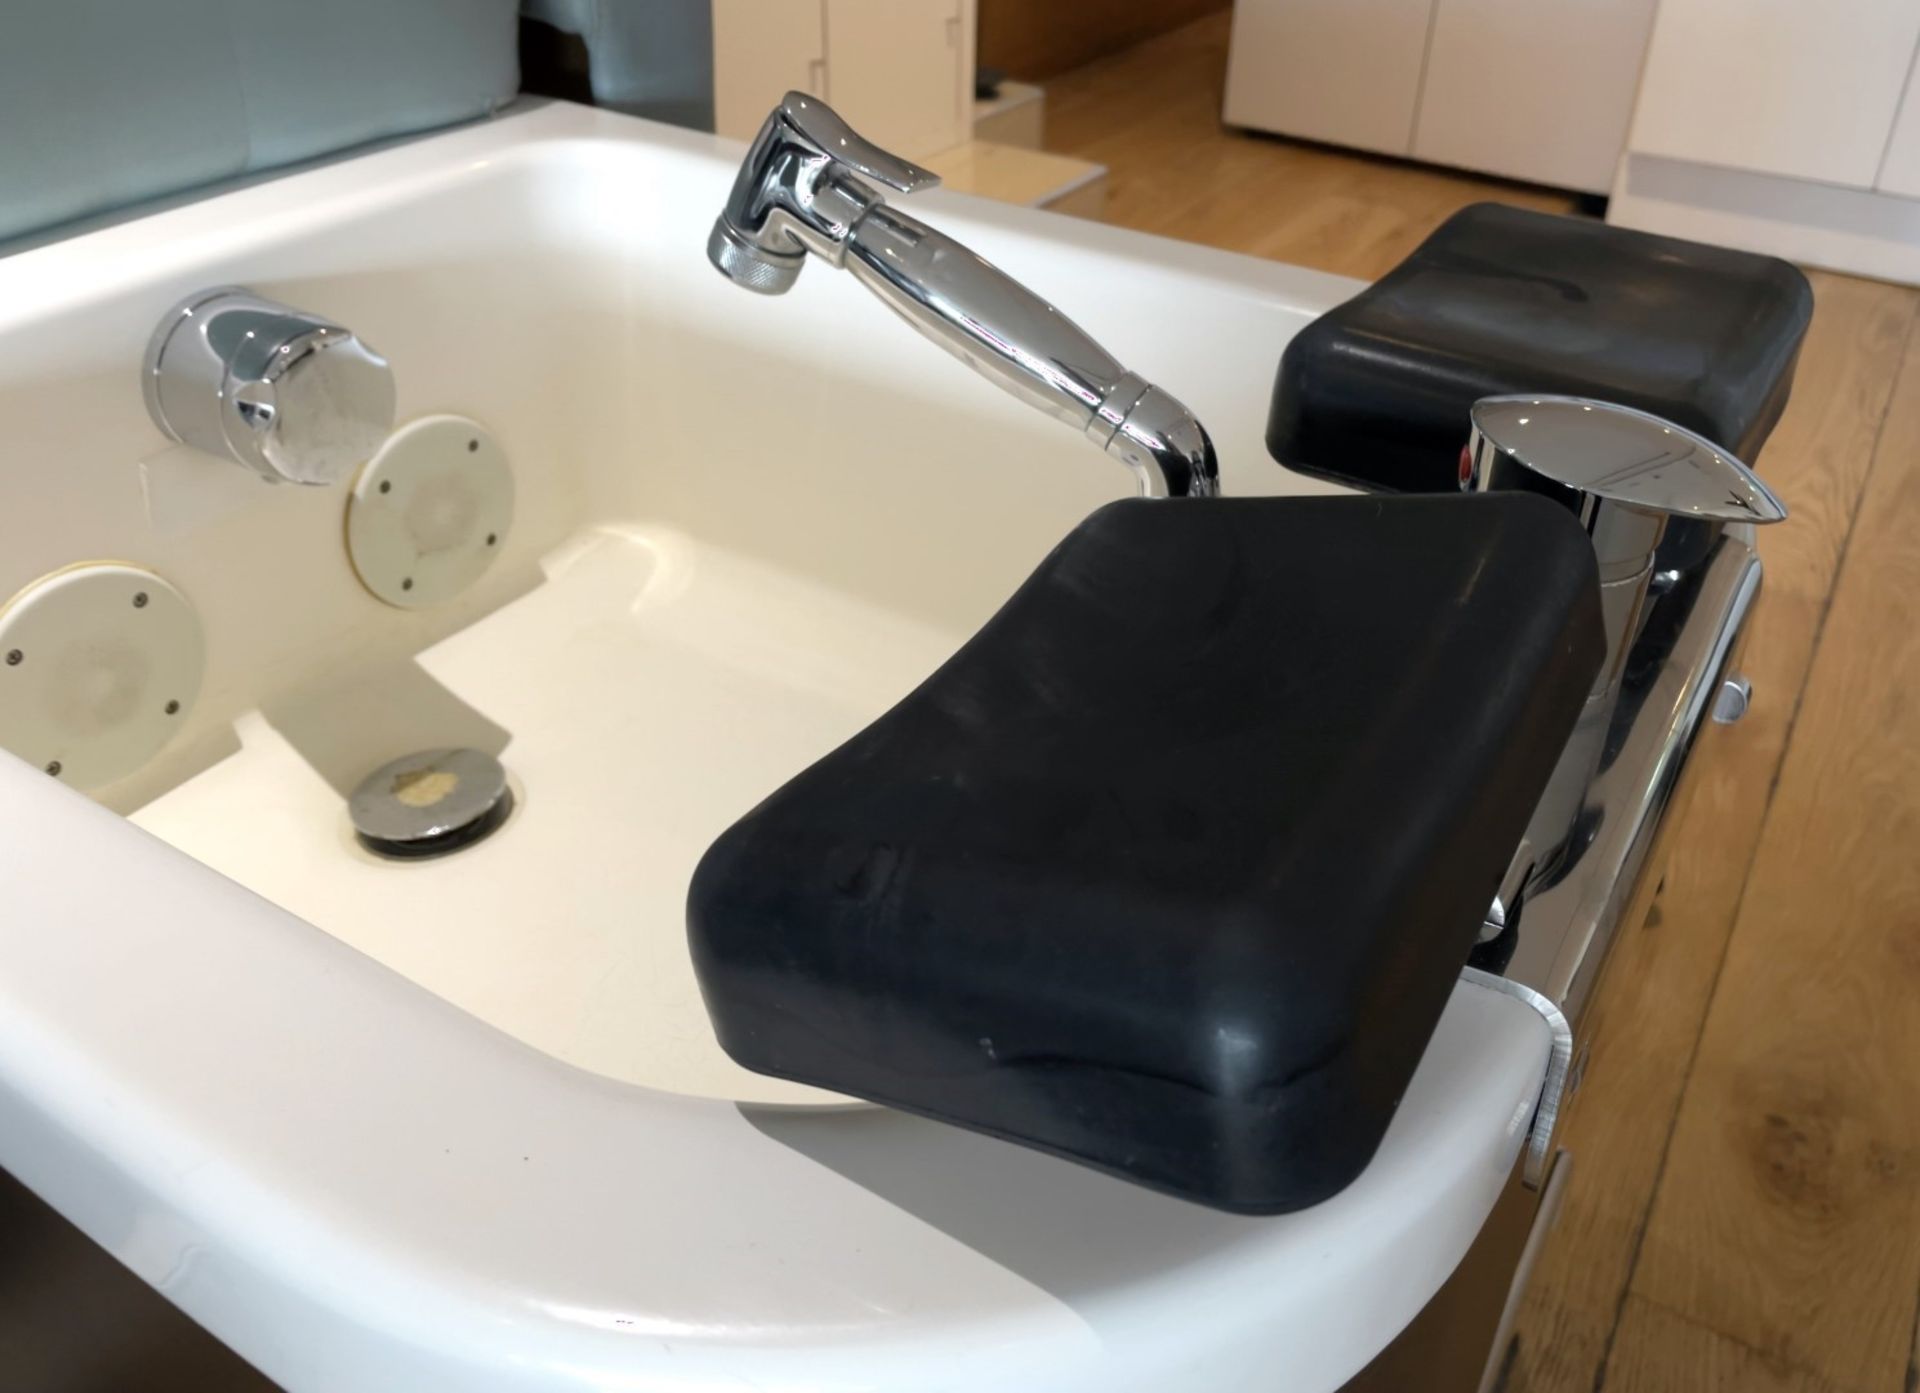 1 x NILO Professional Salon Pedicure Spa Chair With Massage Function - Includes Remote Control - Image 3 of 10